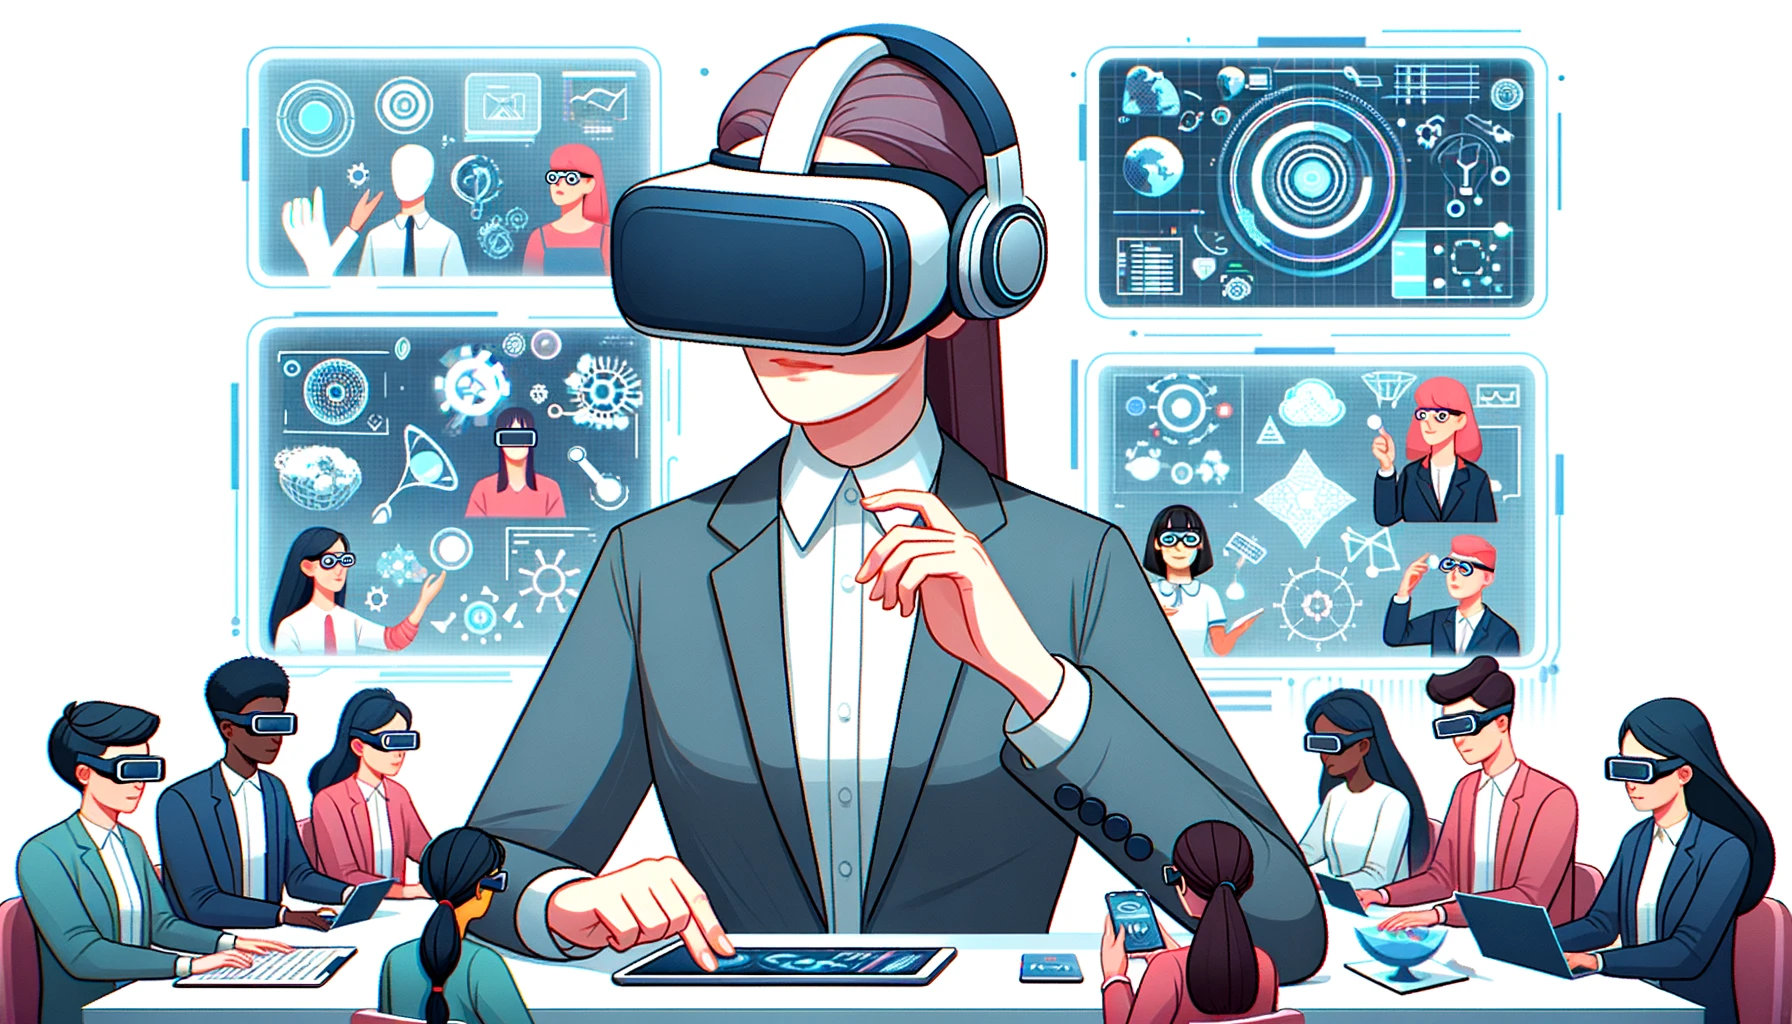 AI-generated illustration depicting a focused female educator immersed in a virtual environment using a VR headset. Behind her, diverse students engage in collaborative activities, with some donning bulky VR headsets, while others work without them. The setting is enhanced with holographic screens showcasing various educational tools and 3D models